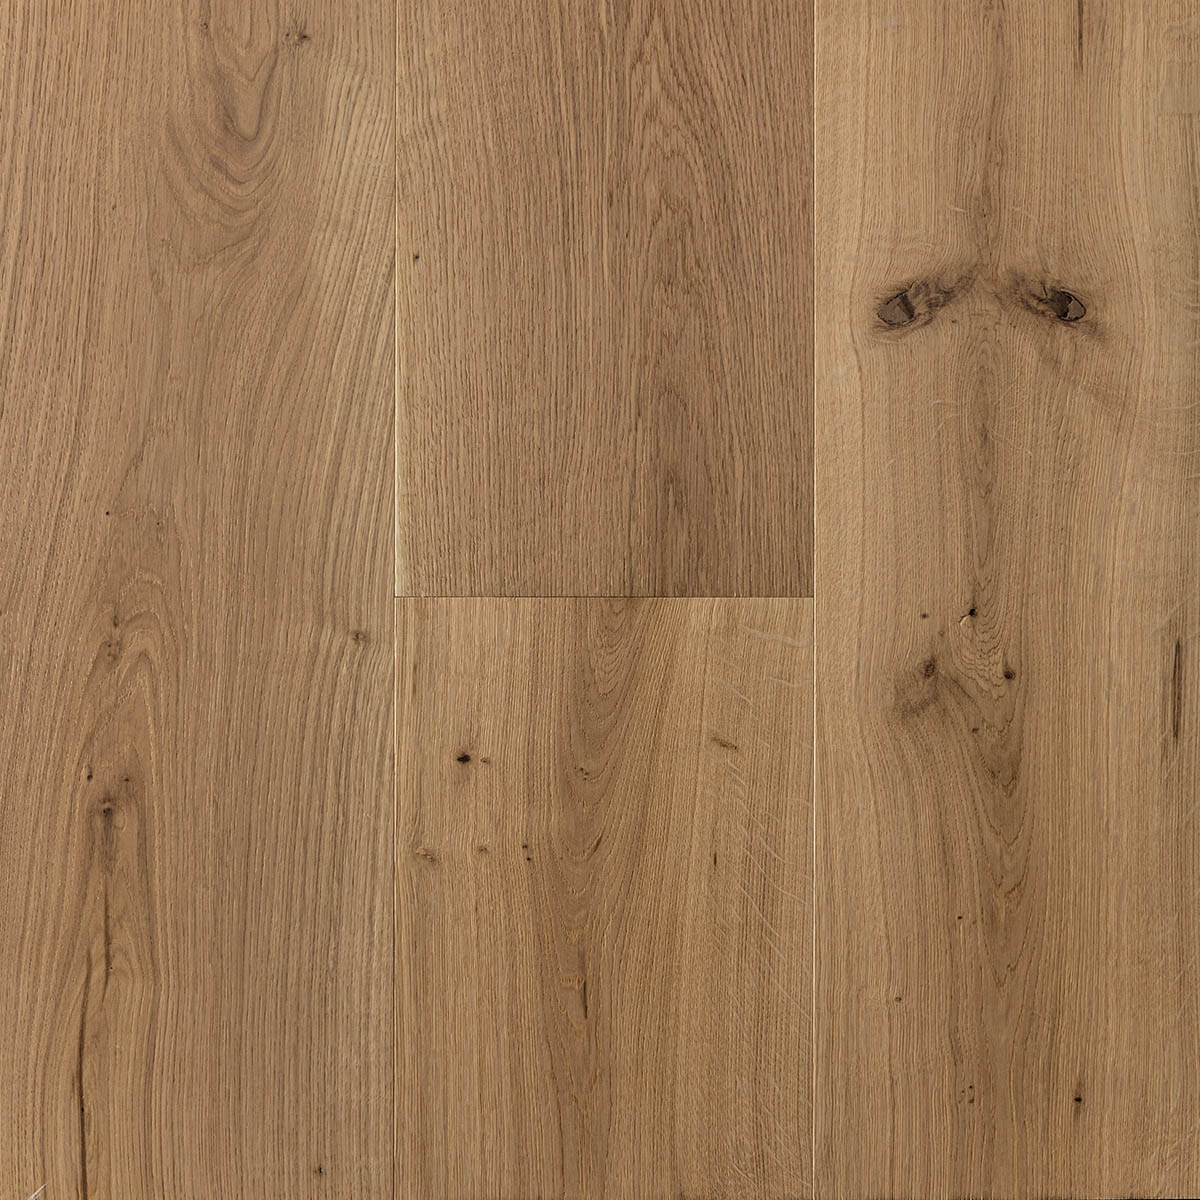 Natural-grade European oak floor finished with an unfinished look